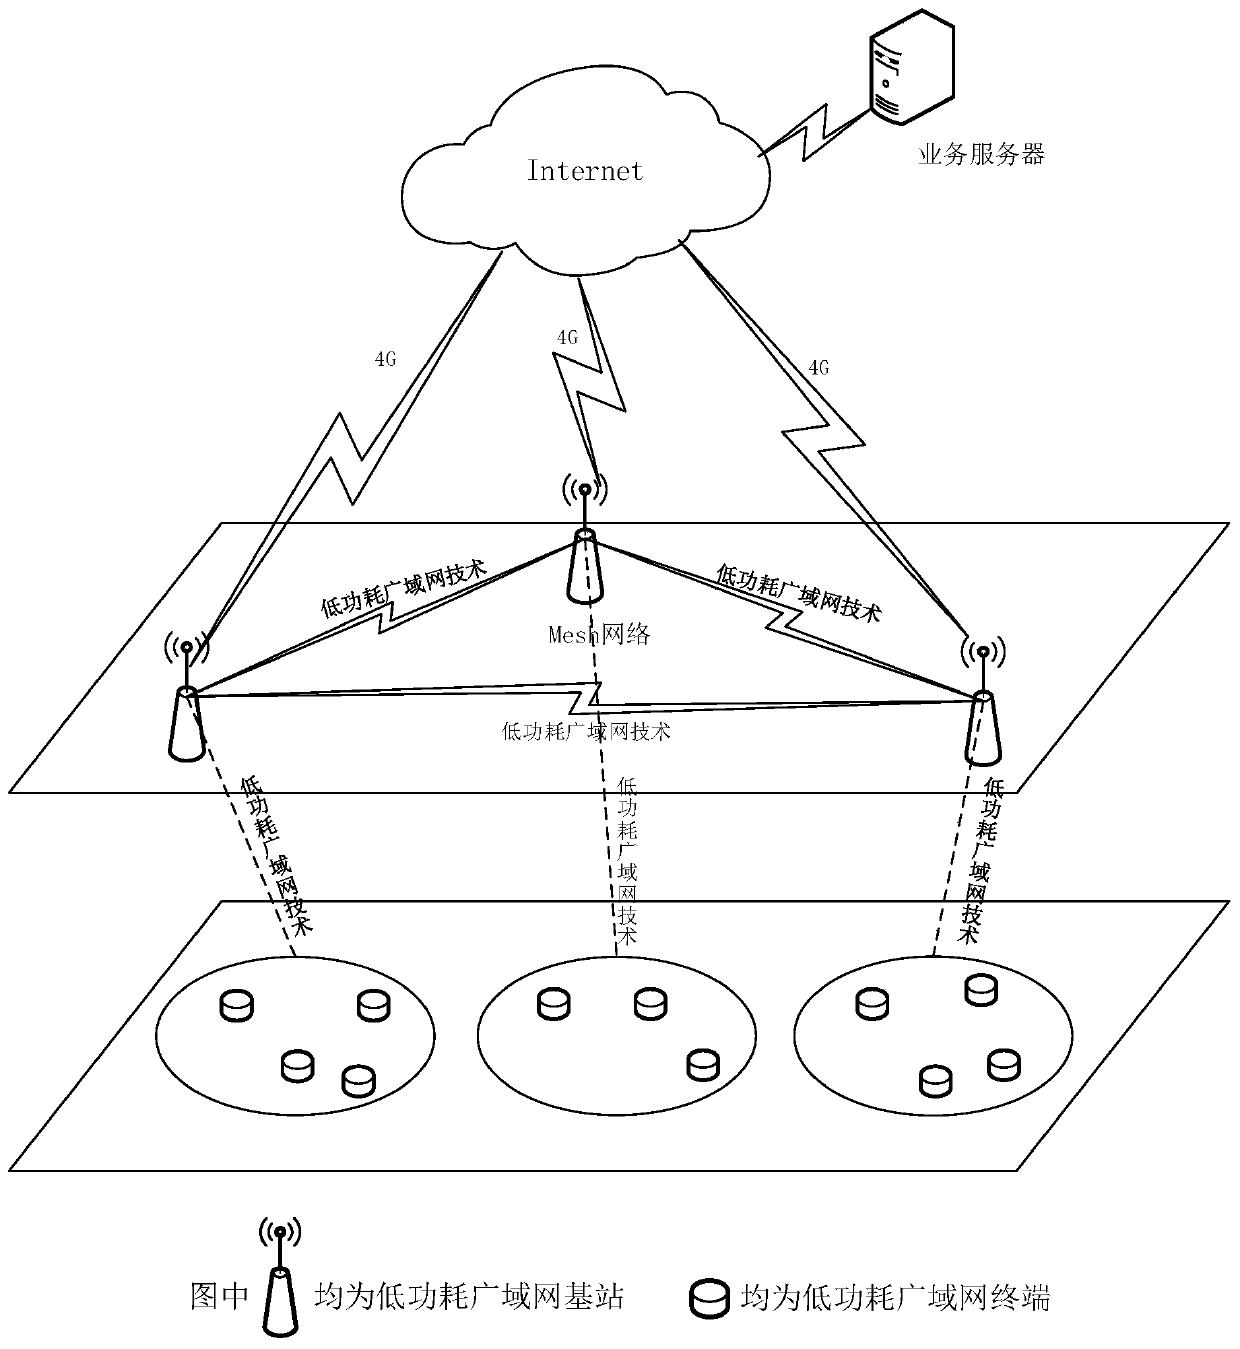 Ubiquitous access method and system based on low power wide area network and mesh fusion